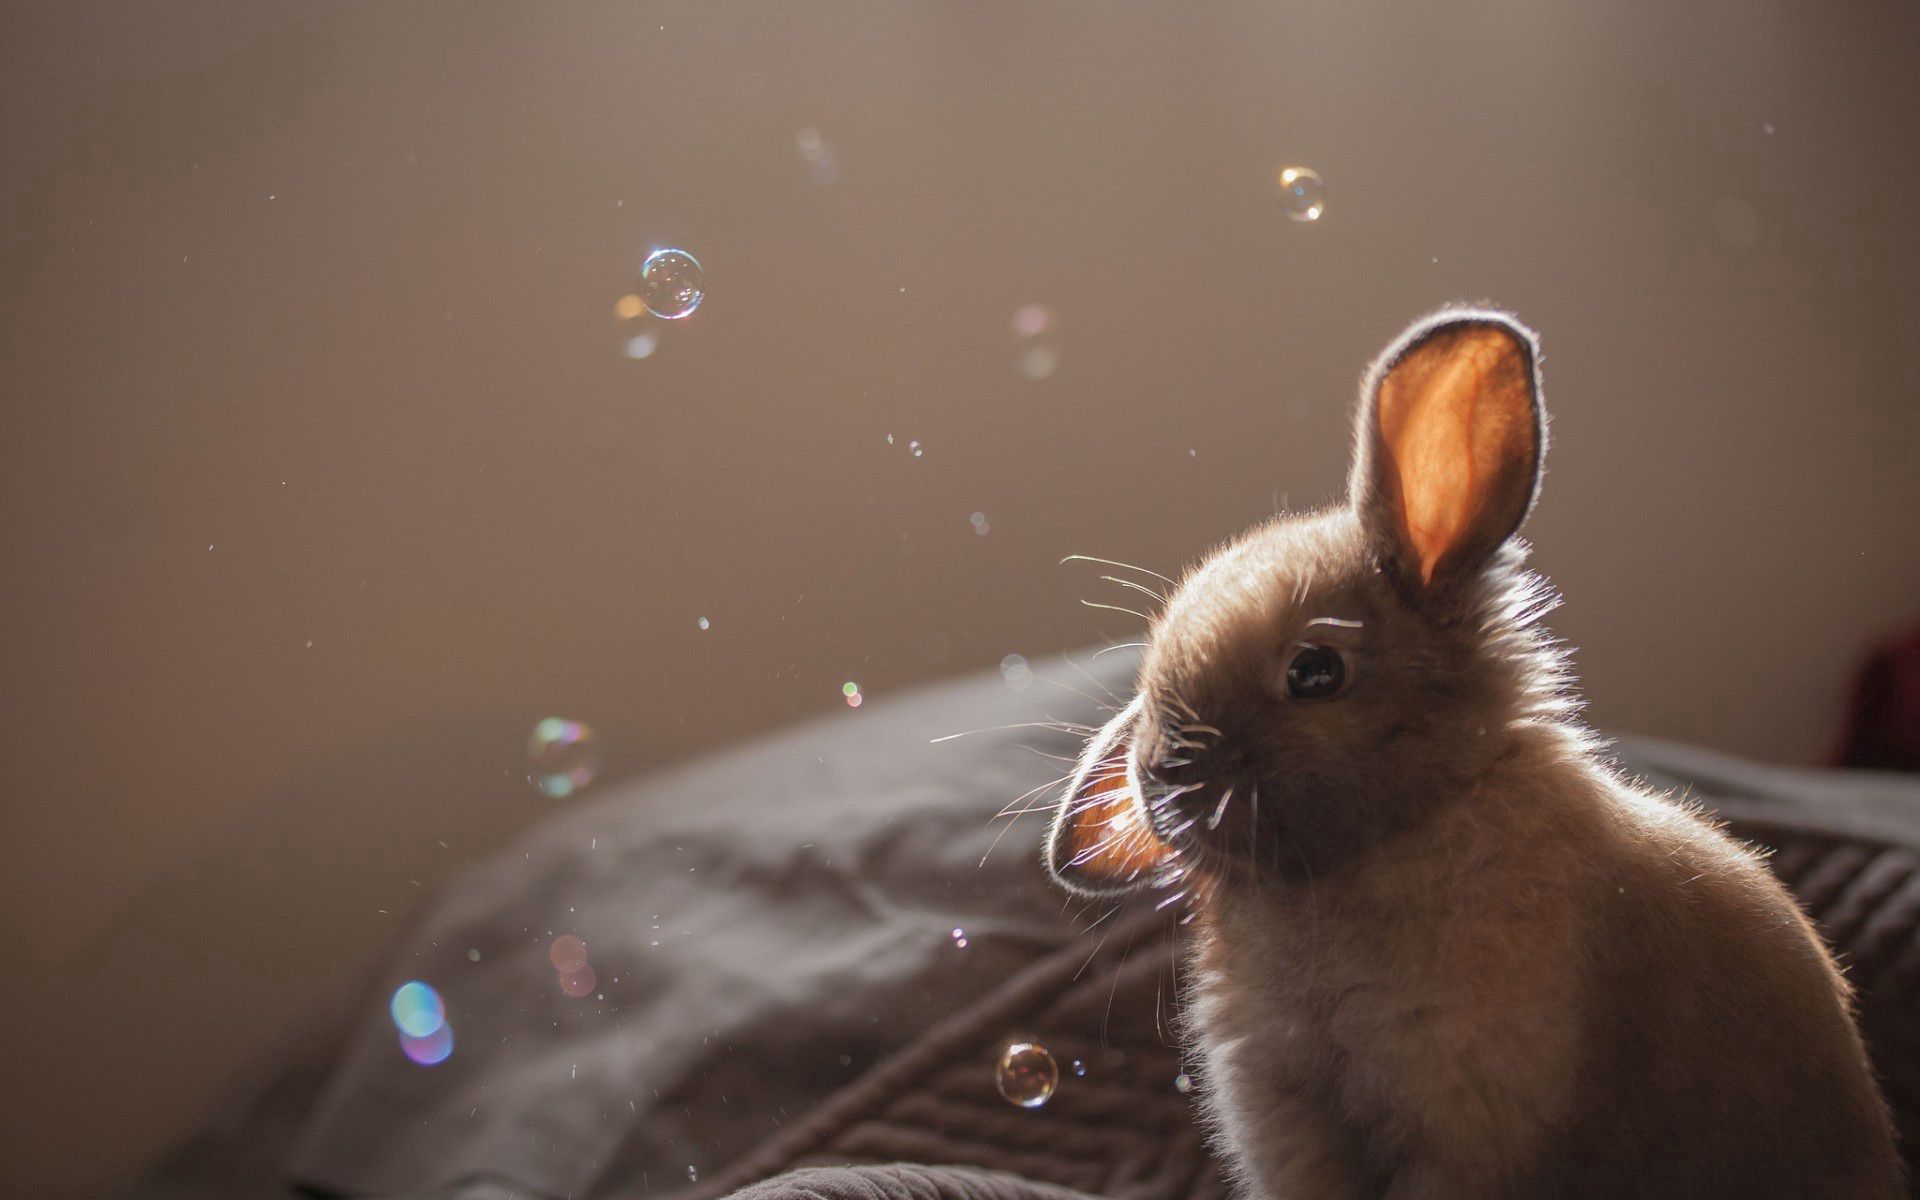 63850 download wallpaper animals, bubbles, ears, rabbit, bubble screensavers and pictures for free